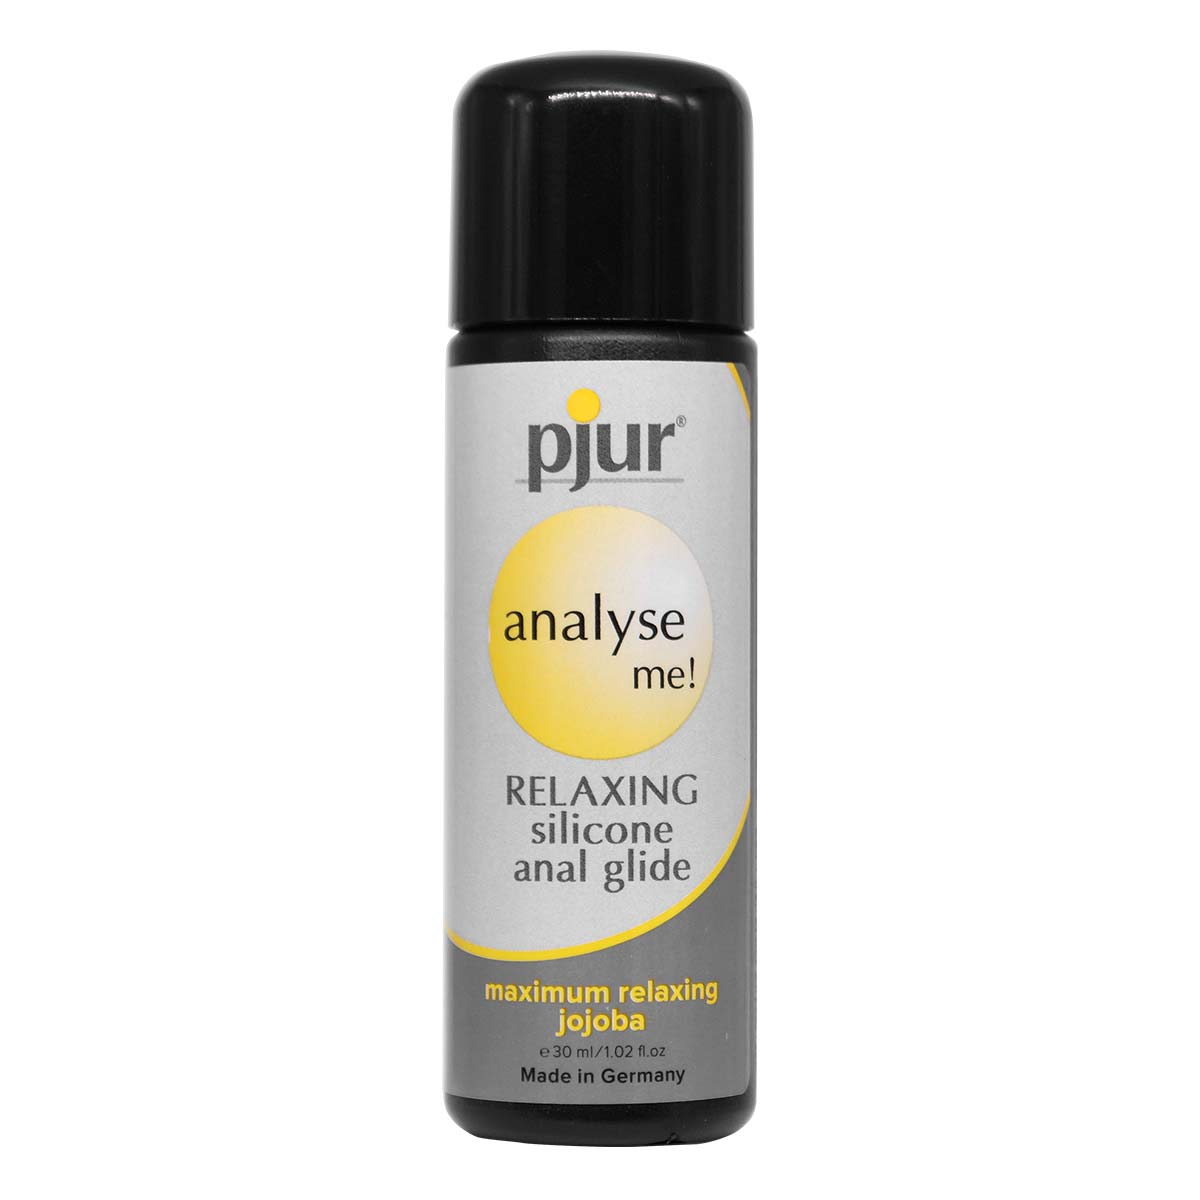 pjur analyse me! RELAXING Silicone Anal Glide 30ml Silicone-based Lubricant-p_2